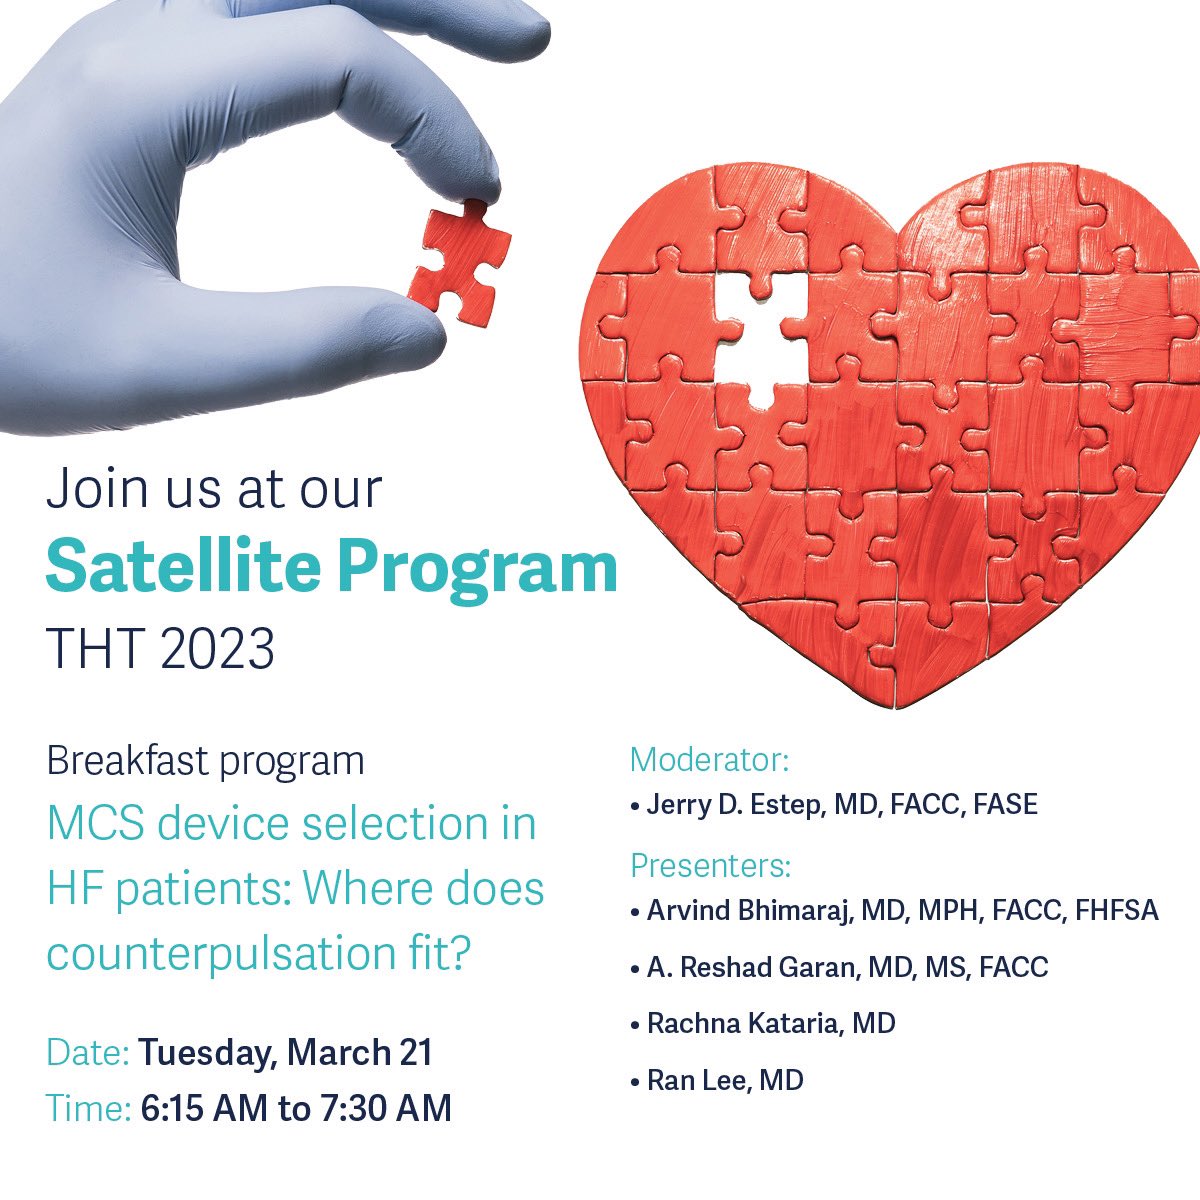 Join us for the satellite program at #THT2023 tMCS device selection in heart #FunctionNotFailure : Where does counterpulsation fit? 🎈 🌞 Breakfast symposium 3/21/23 @ReshadGaranMD @hfdocbhimaraj @RanLeeMD @JerryEstepMD